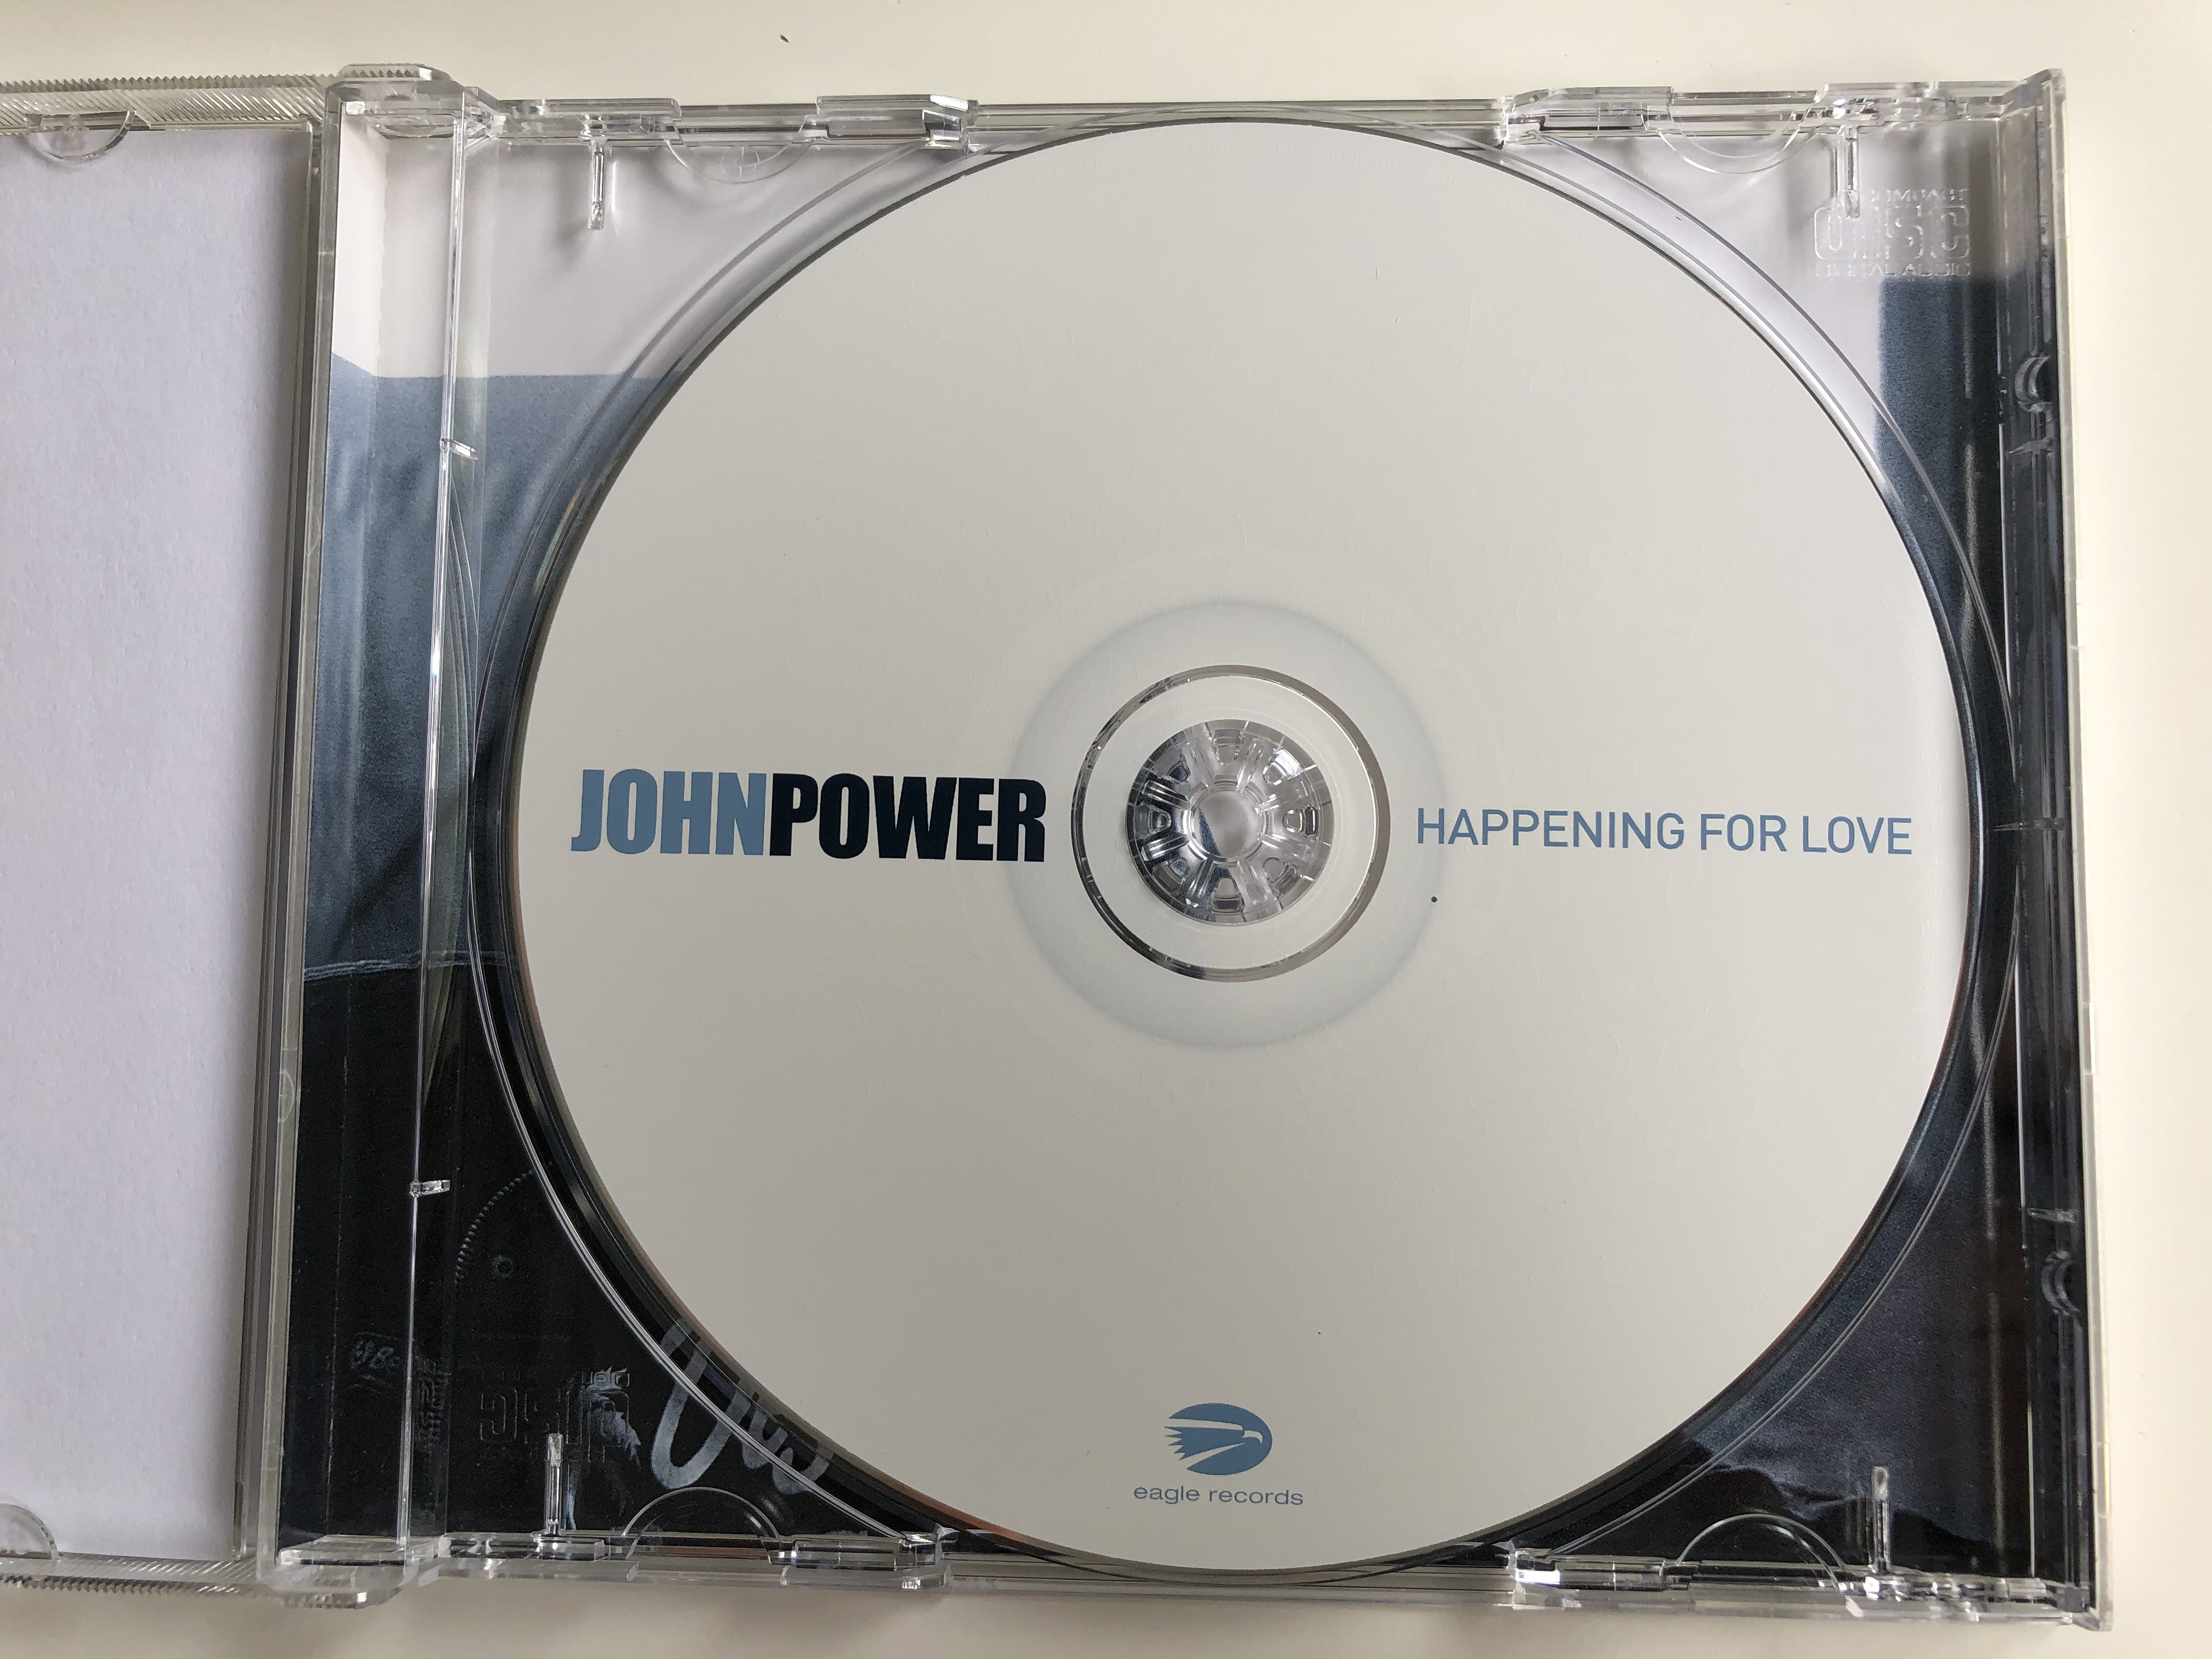 john-power-happening-for-love-debut-solo-album-from-the-lead-singer-and-songwriter-of-cast-eagle-records-audio-cd-2003-eagcd249-2-.jpg